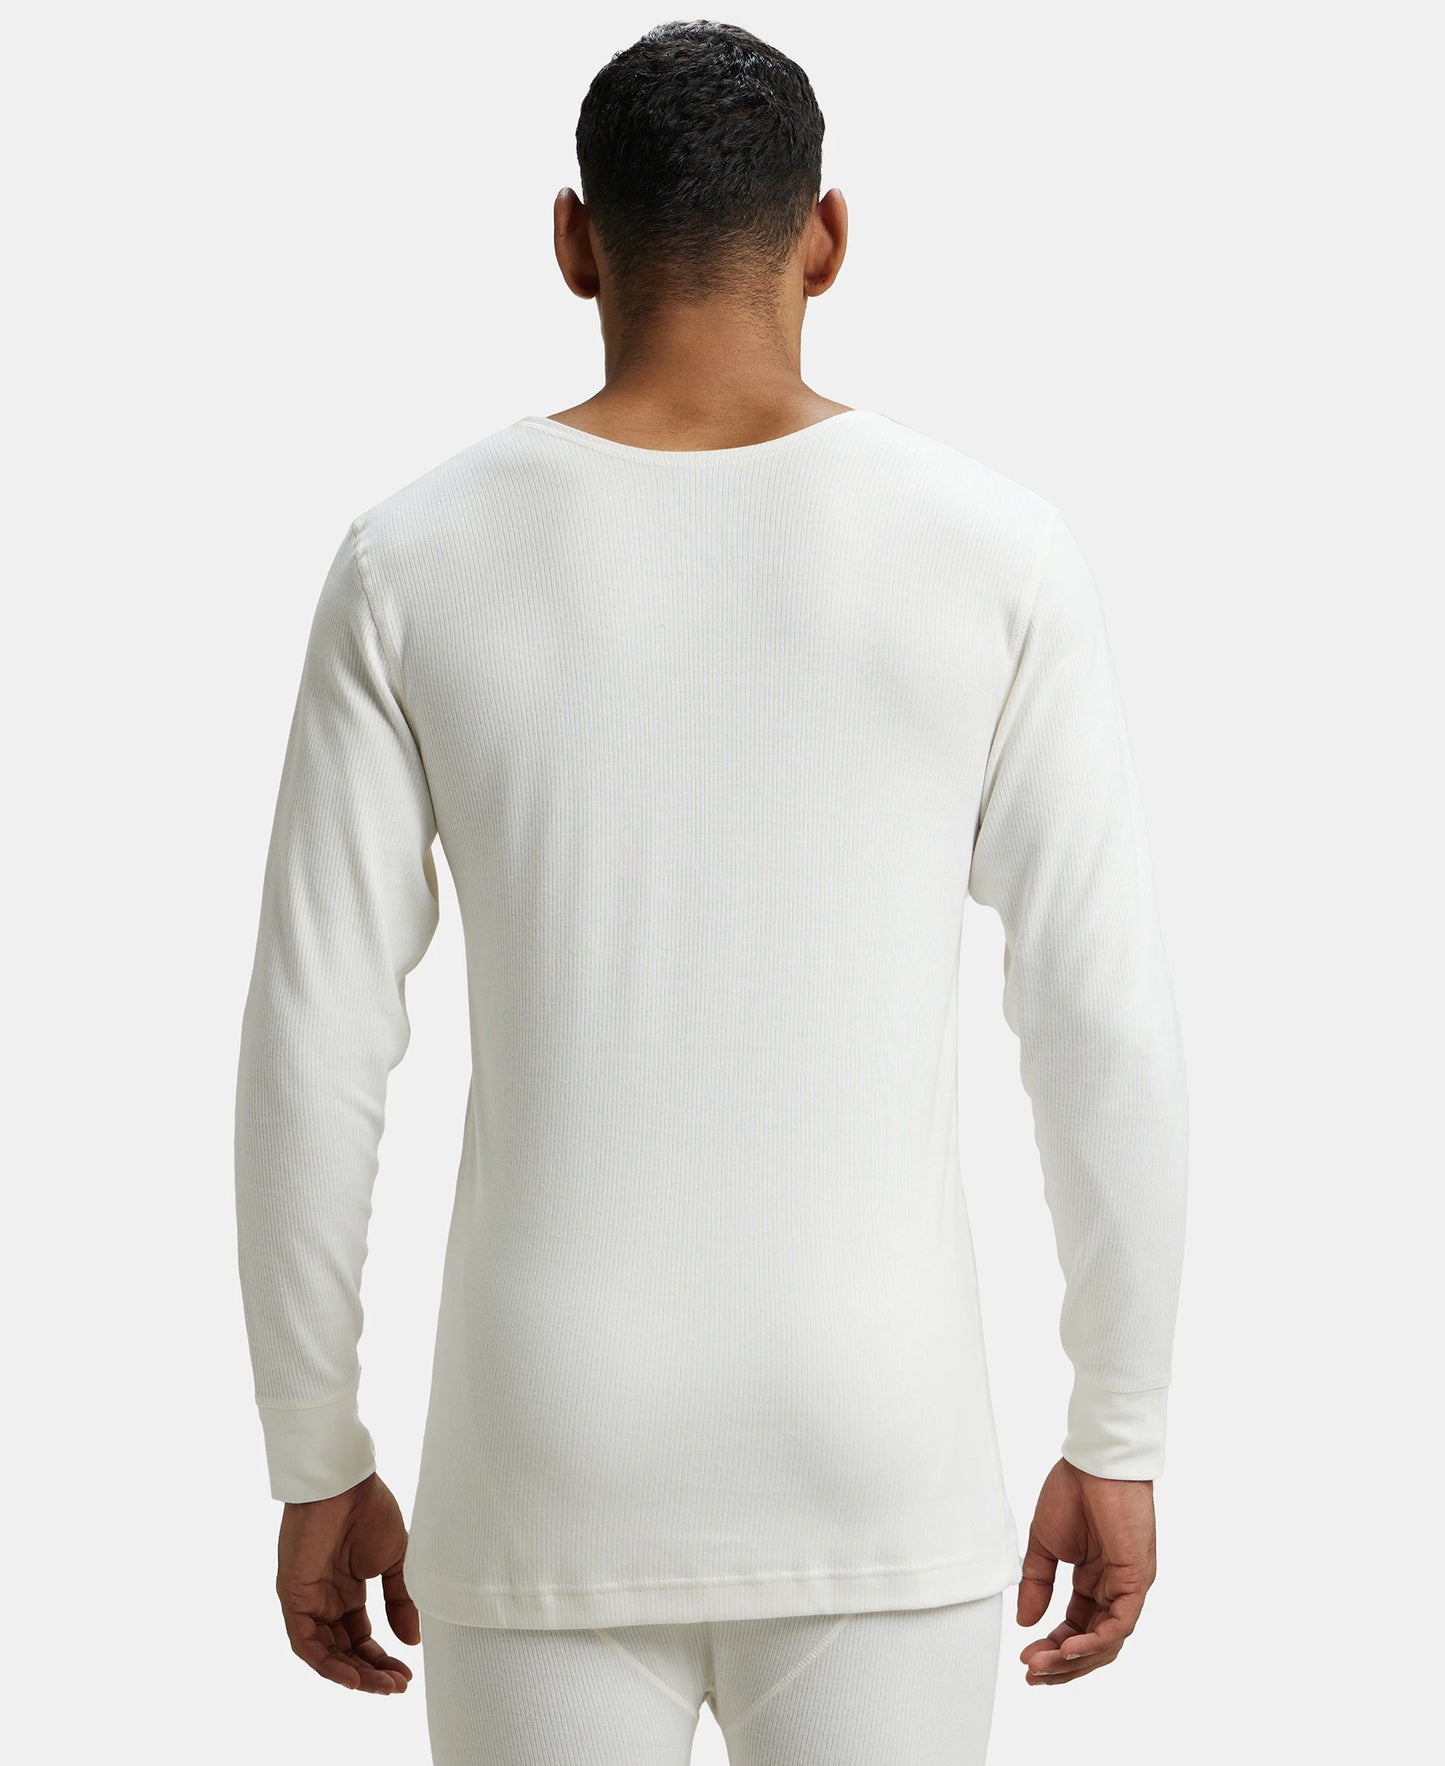 Super Combed Cotton Rich Full Sleeve Thermal Undershirt with StayWarm Technology - Off White-3